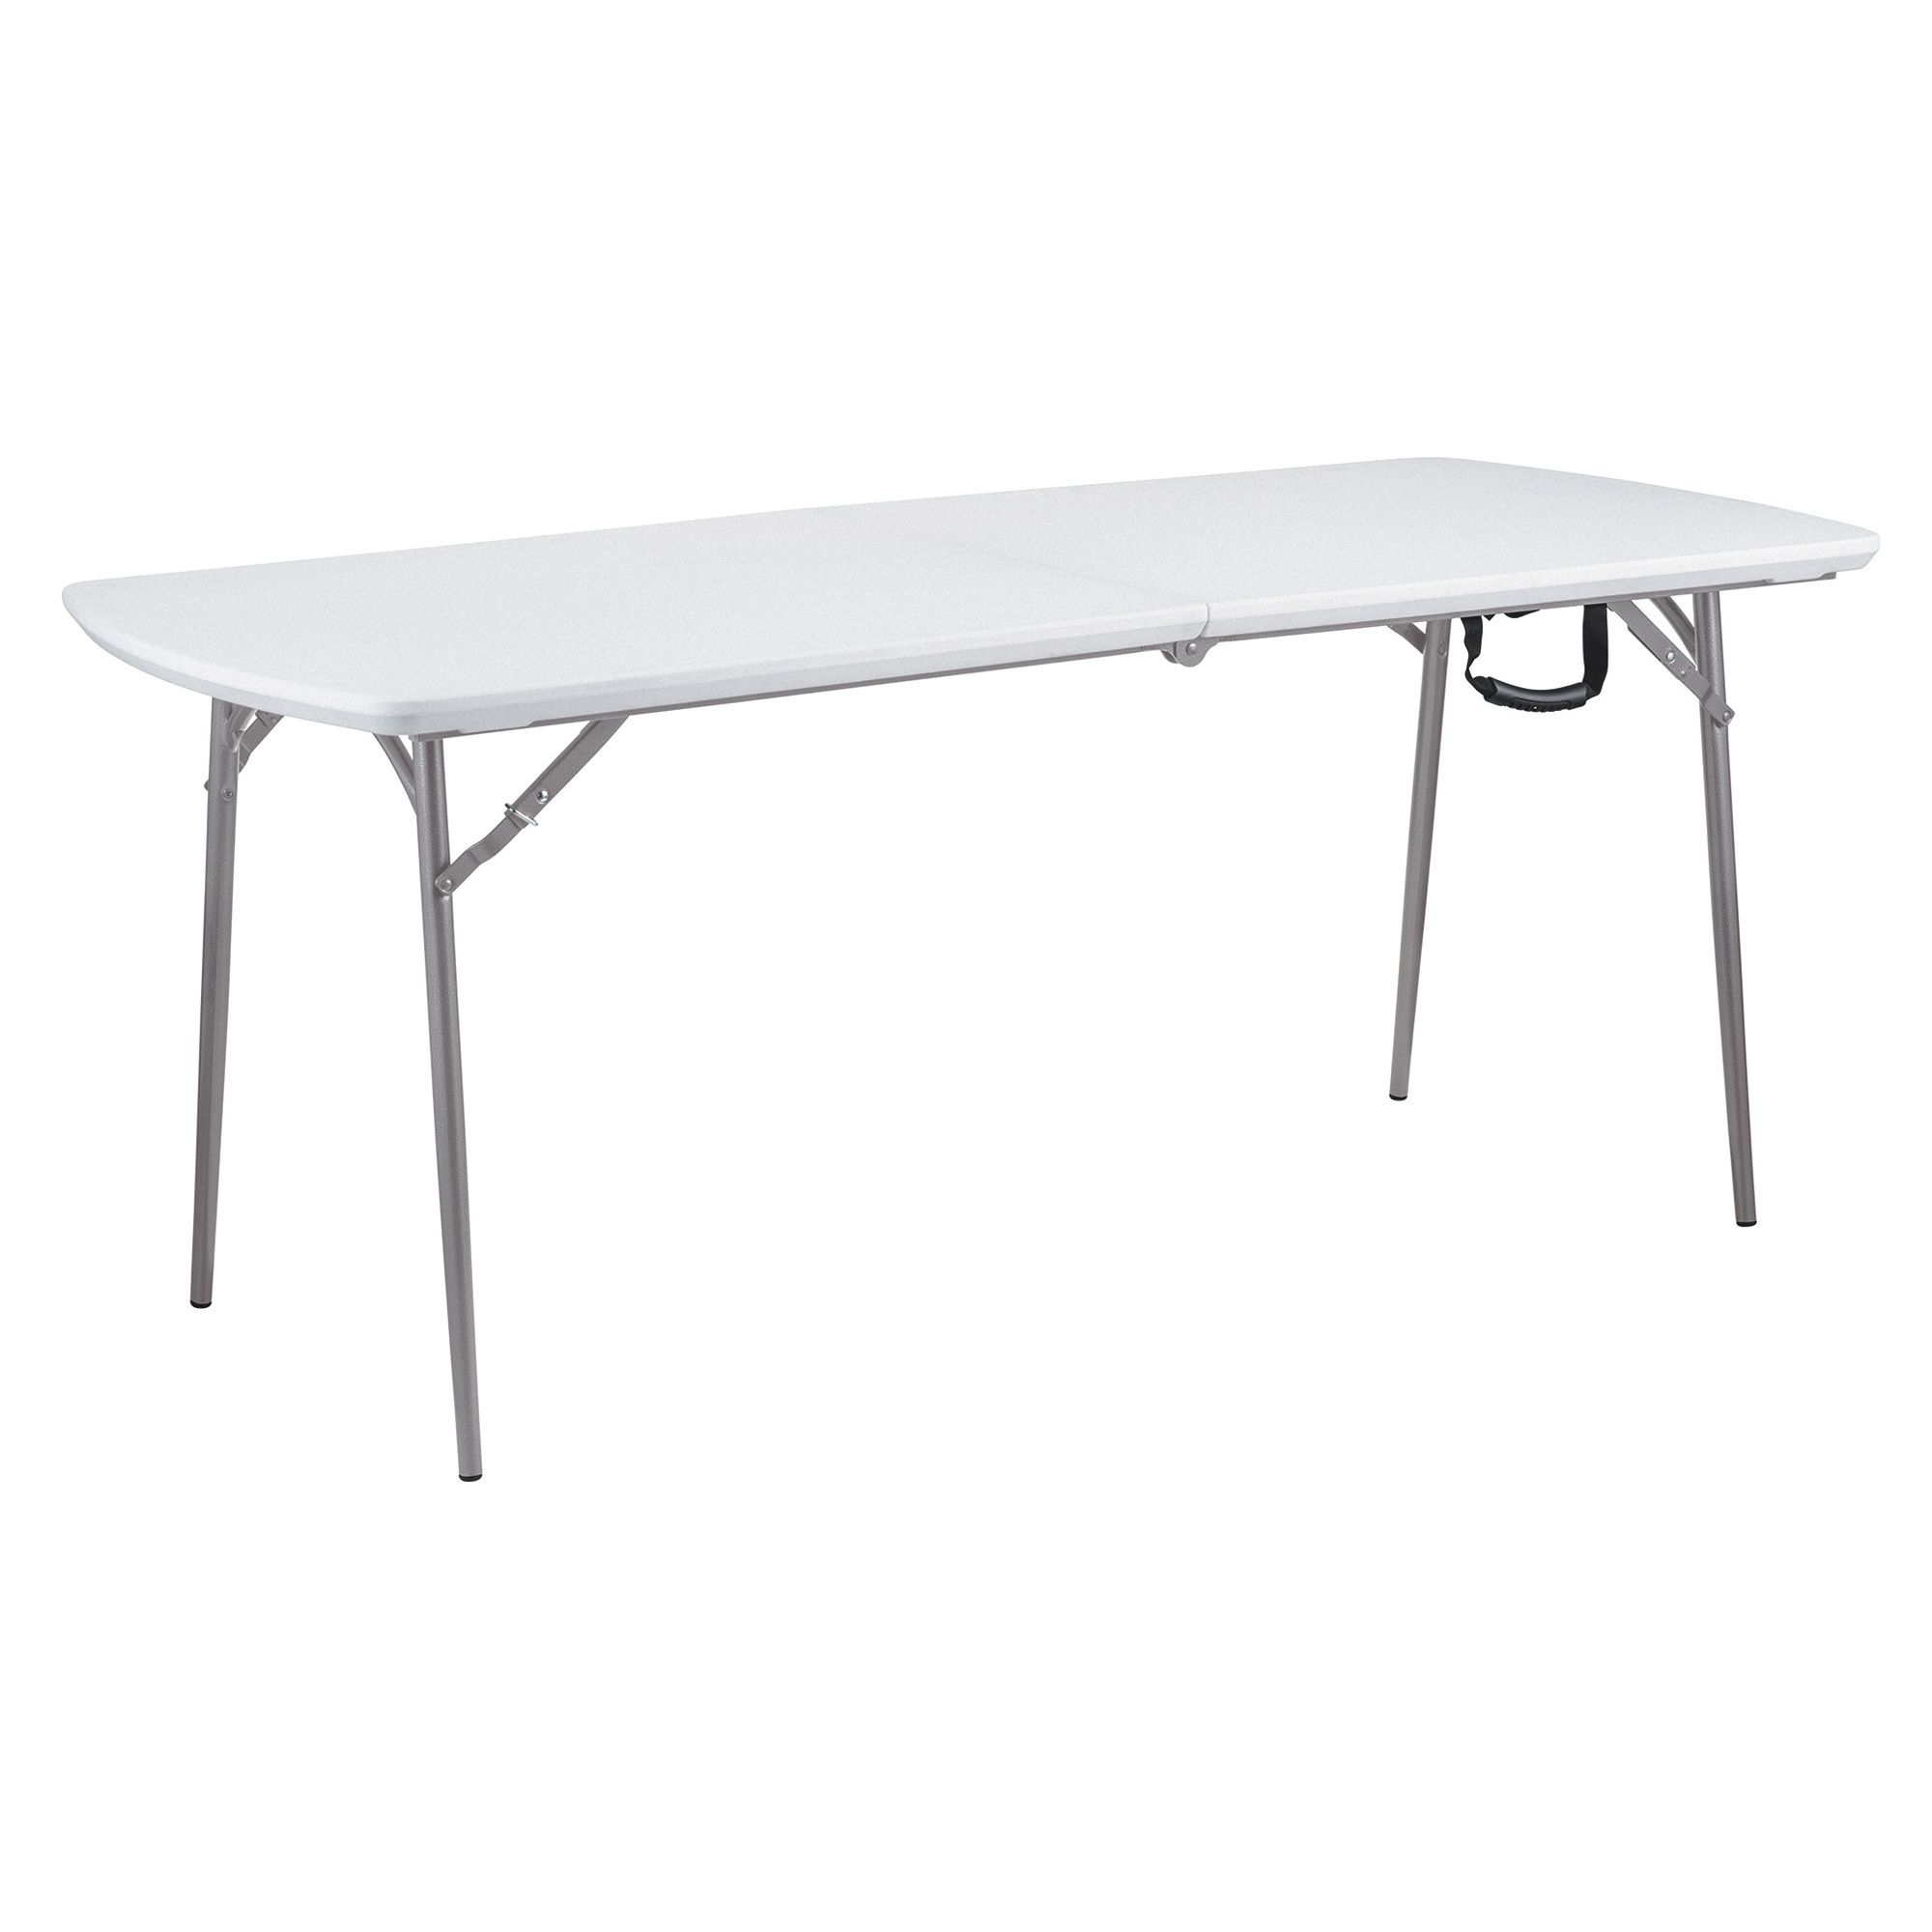 Corp. Fold-In-Half Table — 30Inch x 72Inch, Model - National Public Seating BMFIH3072